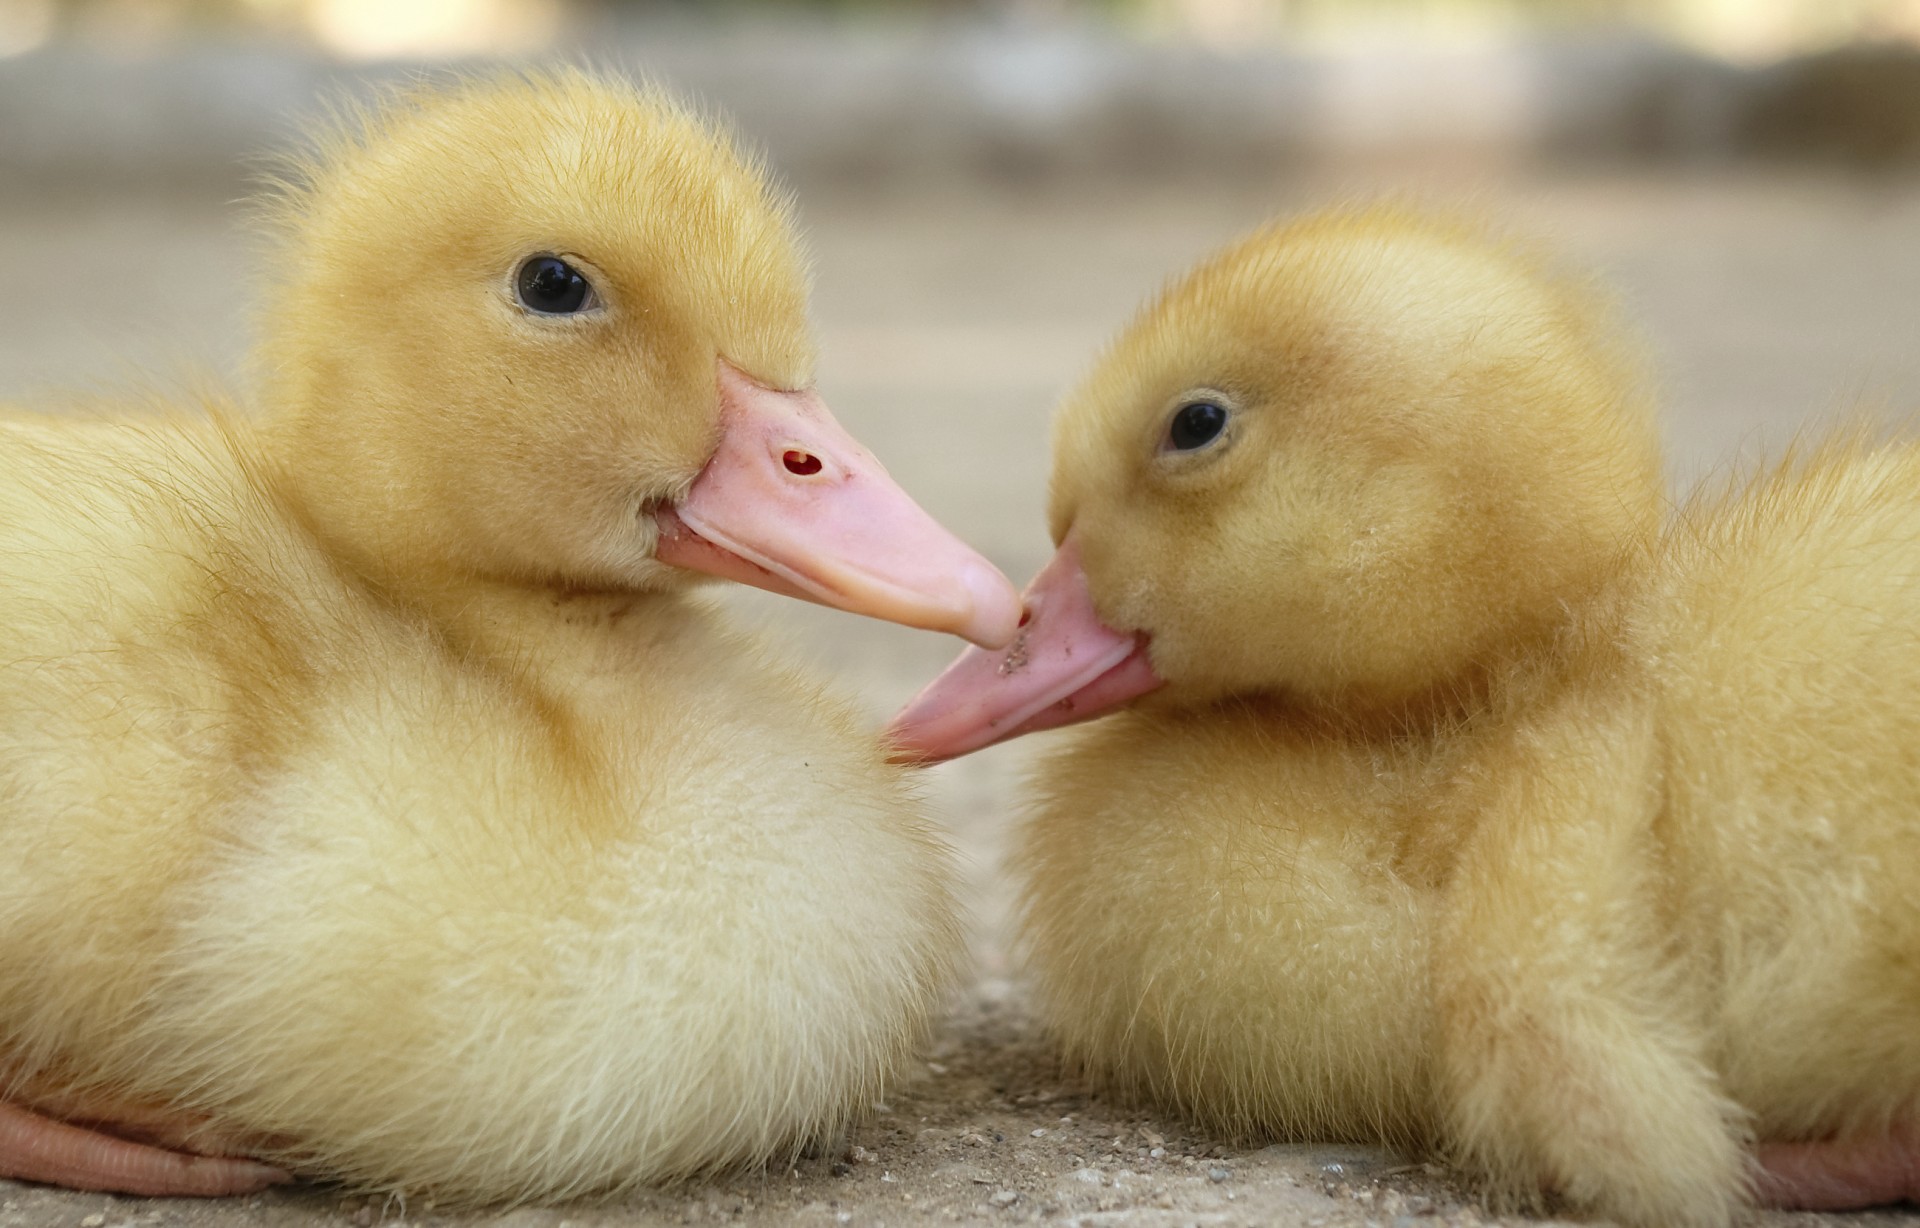 Victory: Supreme Court Upholds Californiaâ€™s Ban on Force-Feeding of Ducks and Geese!